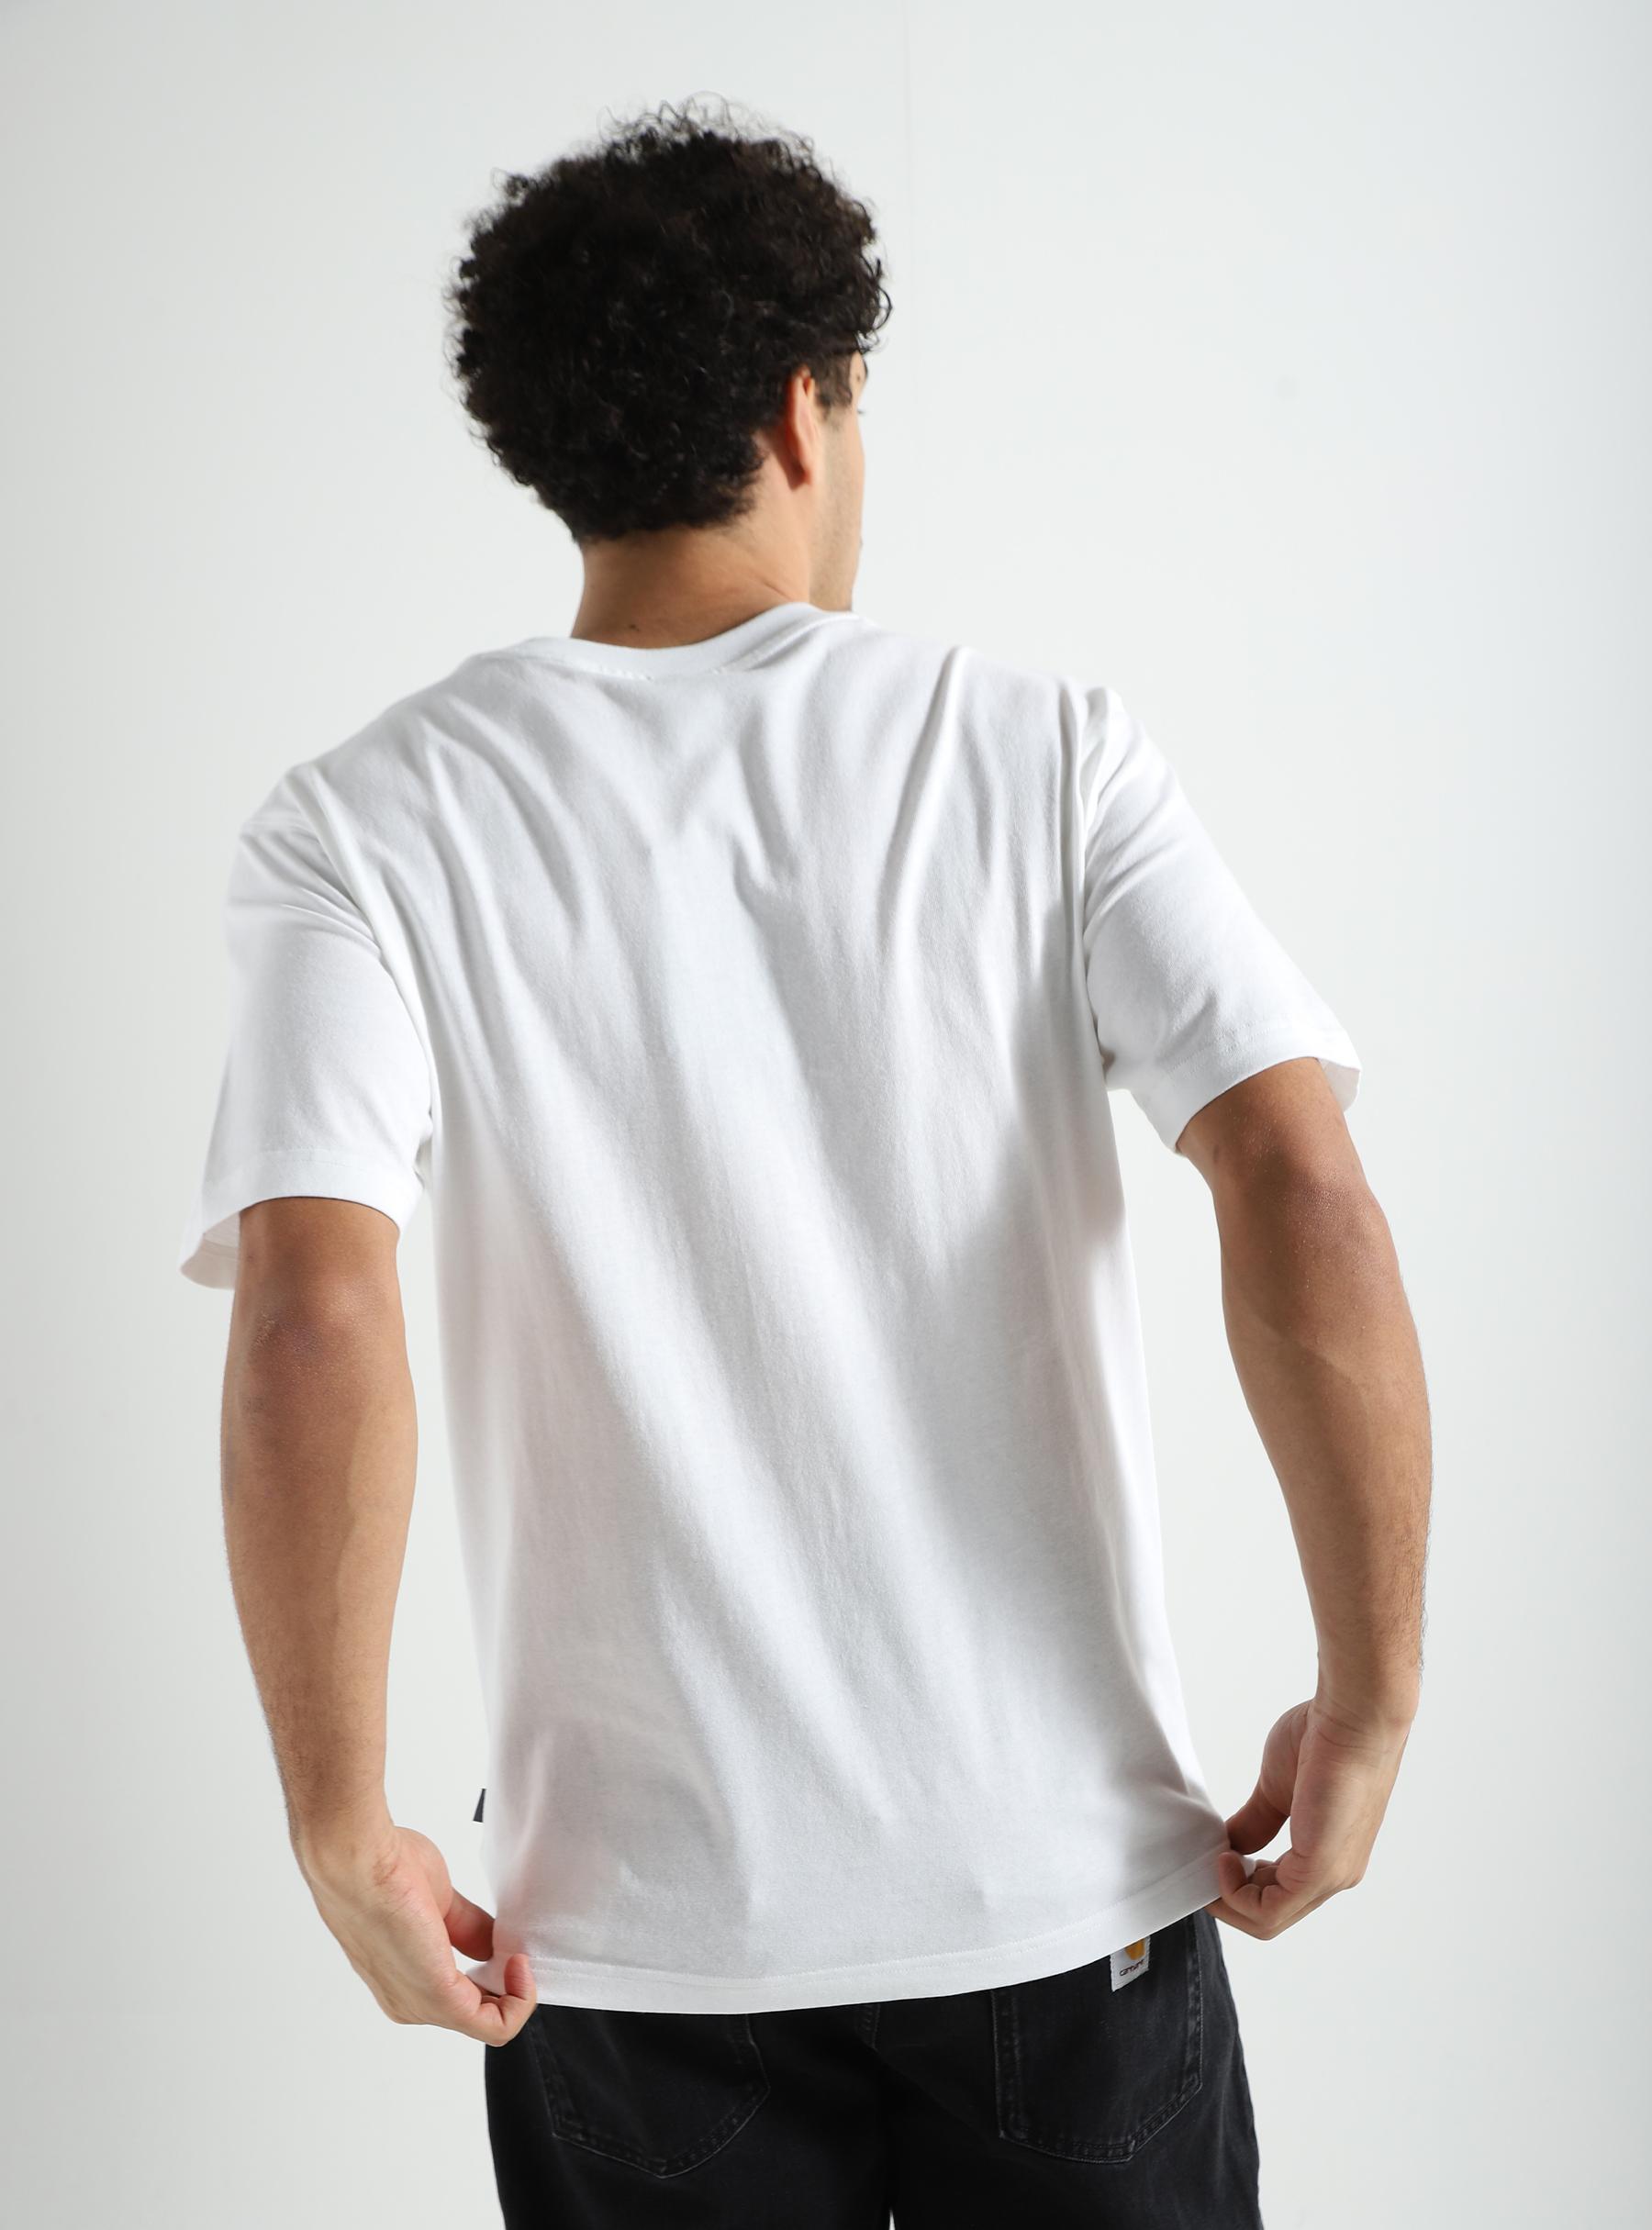 Athletics Models Never Age Relaxed T-shirt White MT41548-WT